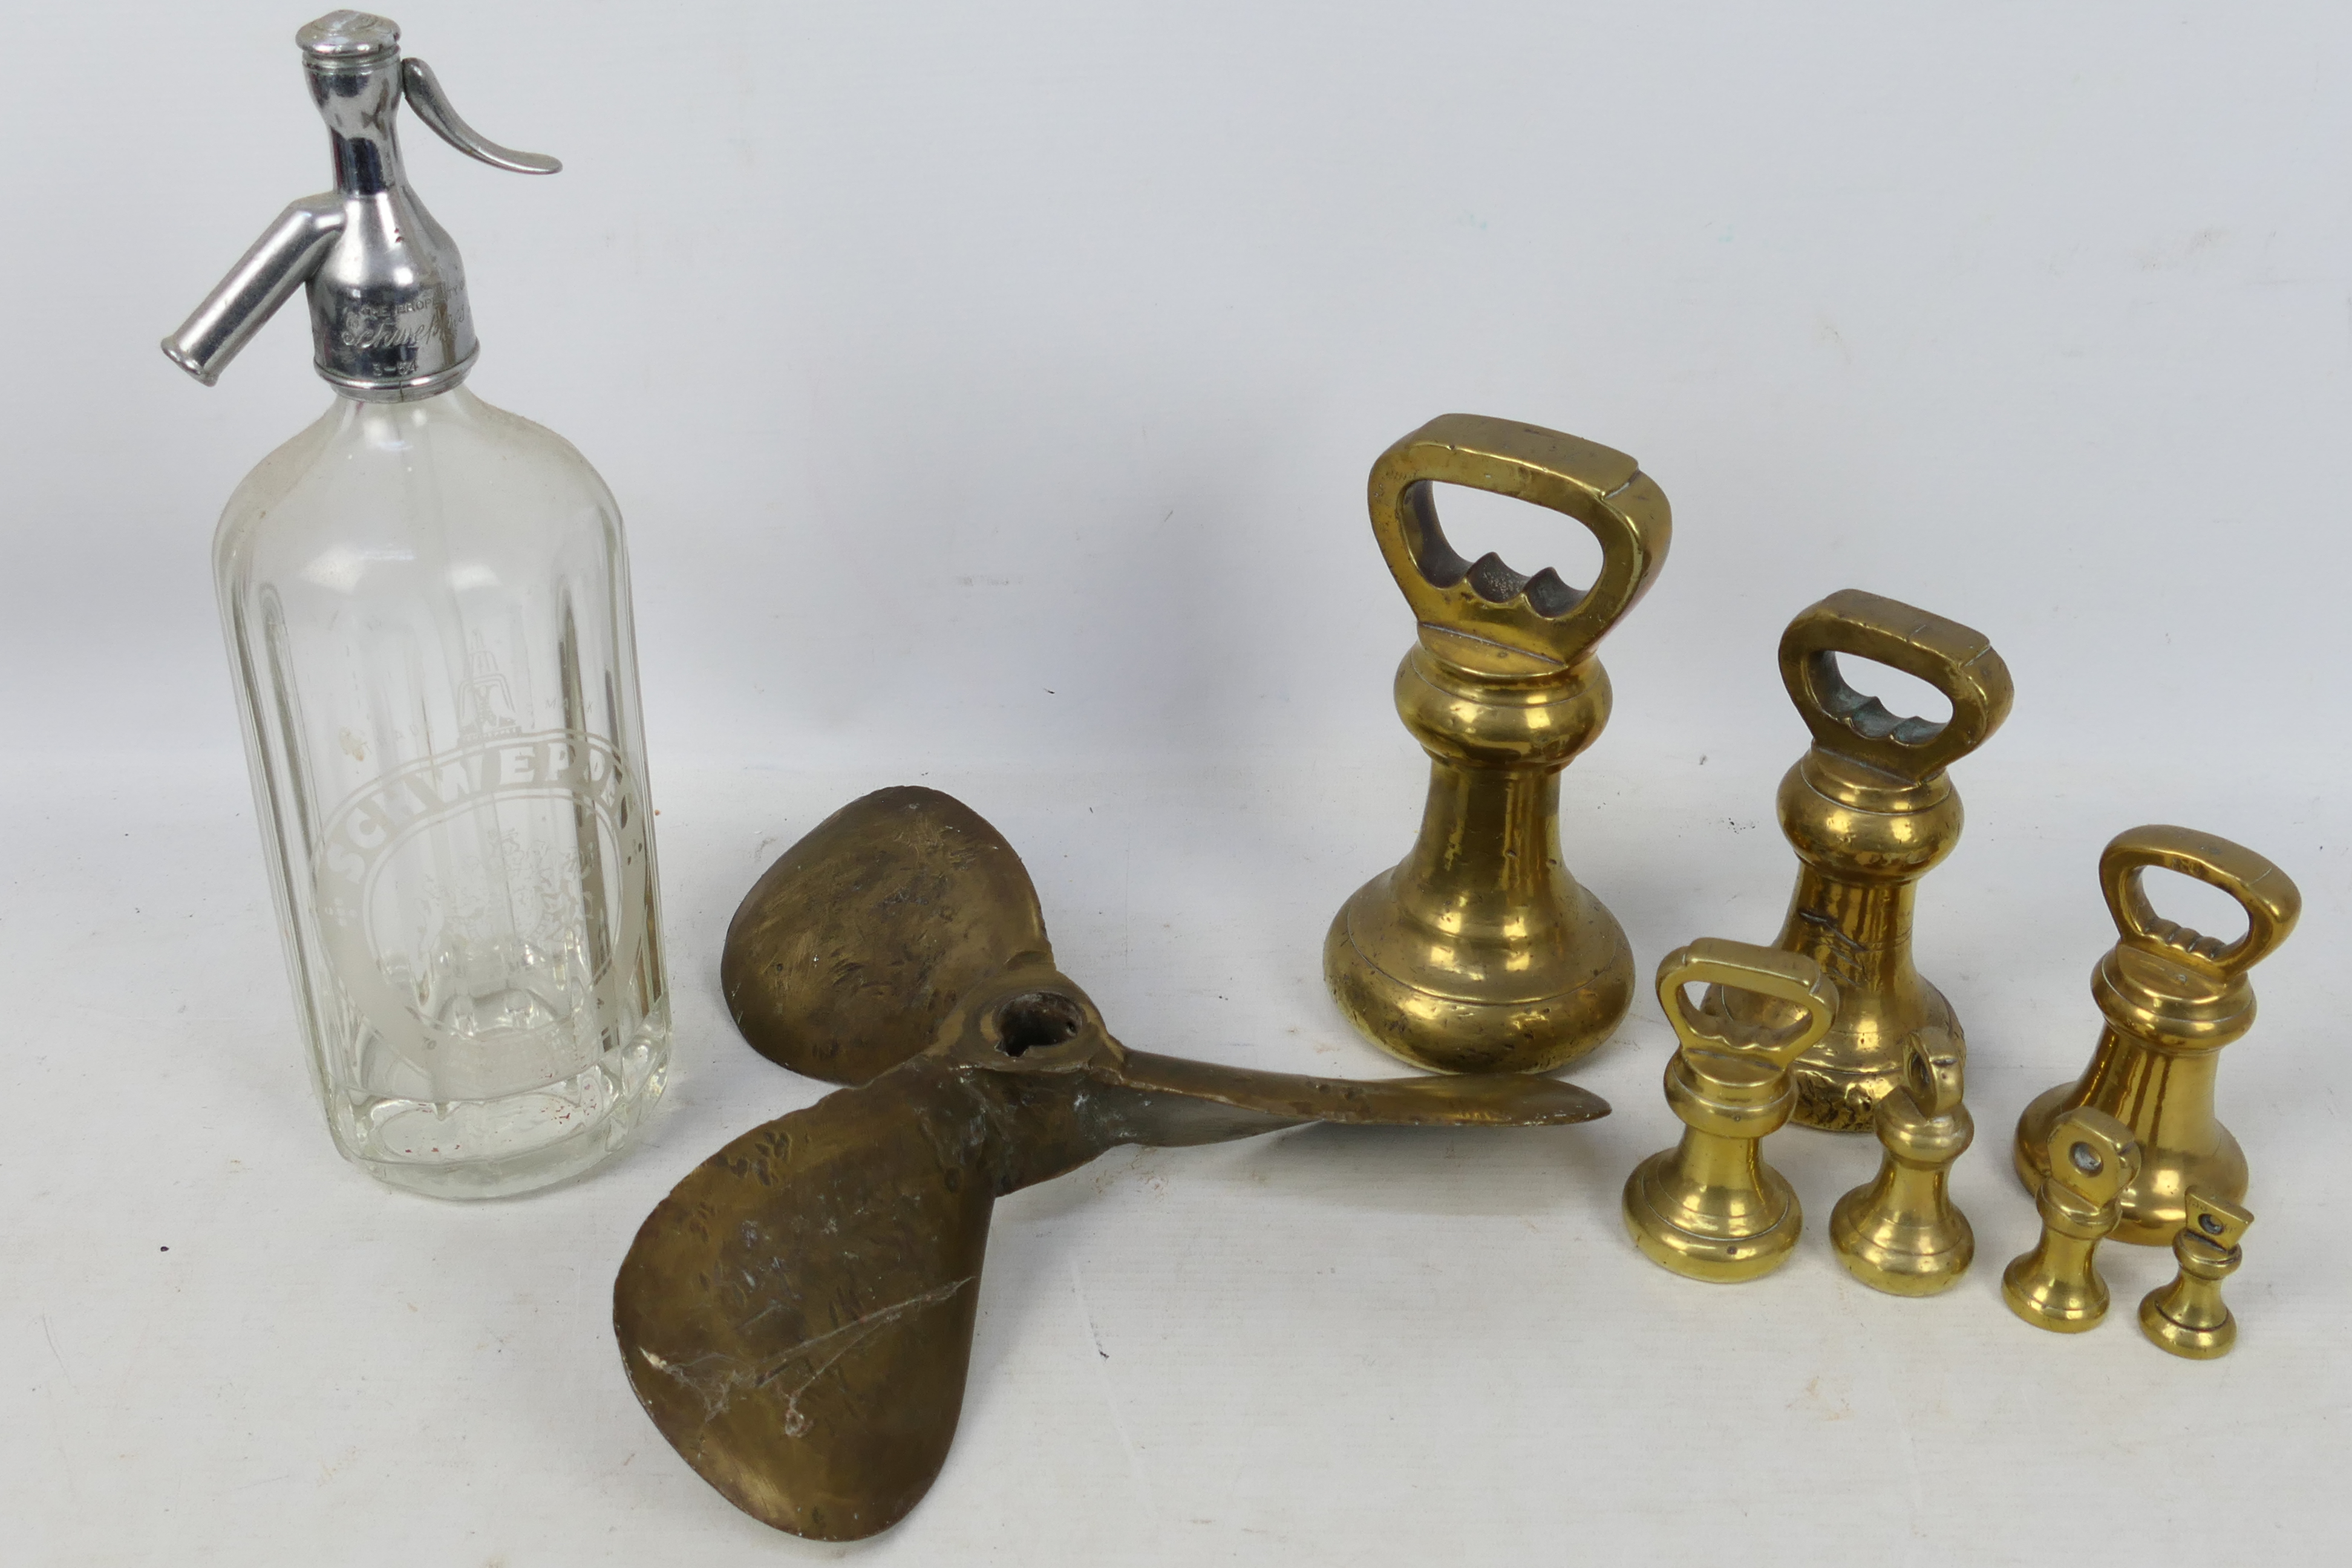 A brass propeller, brass weights and a vintage Schweppes soda syphon.